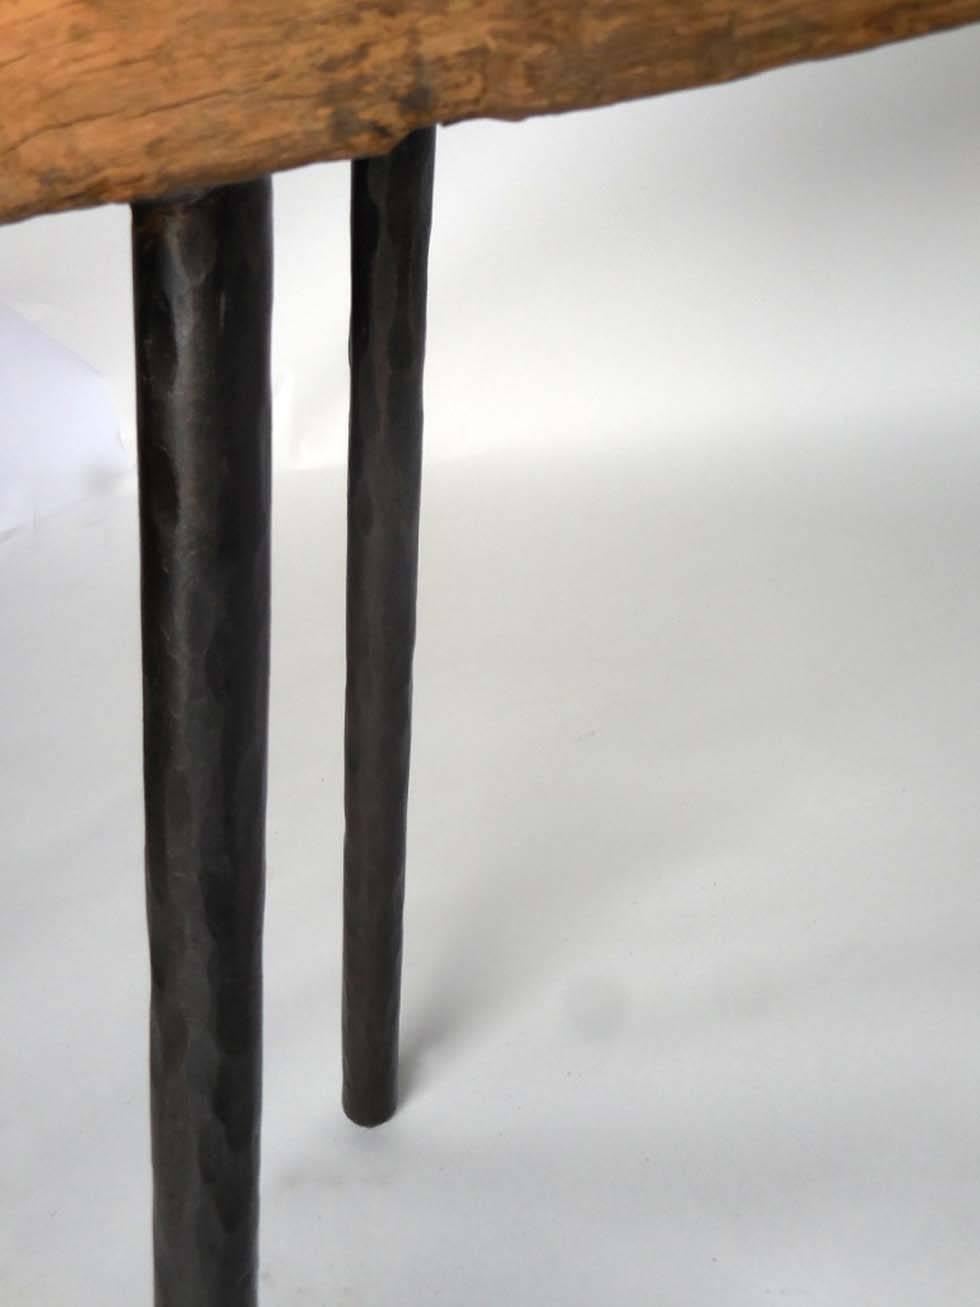 American Rustic Japanese Wooden Trough Console with Hand Forged Iron Legs